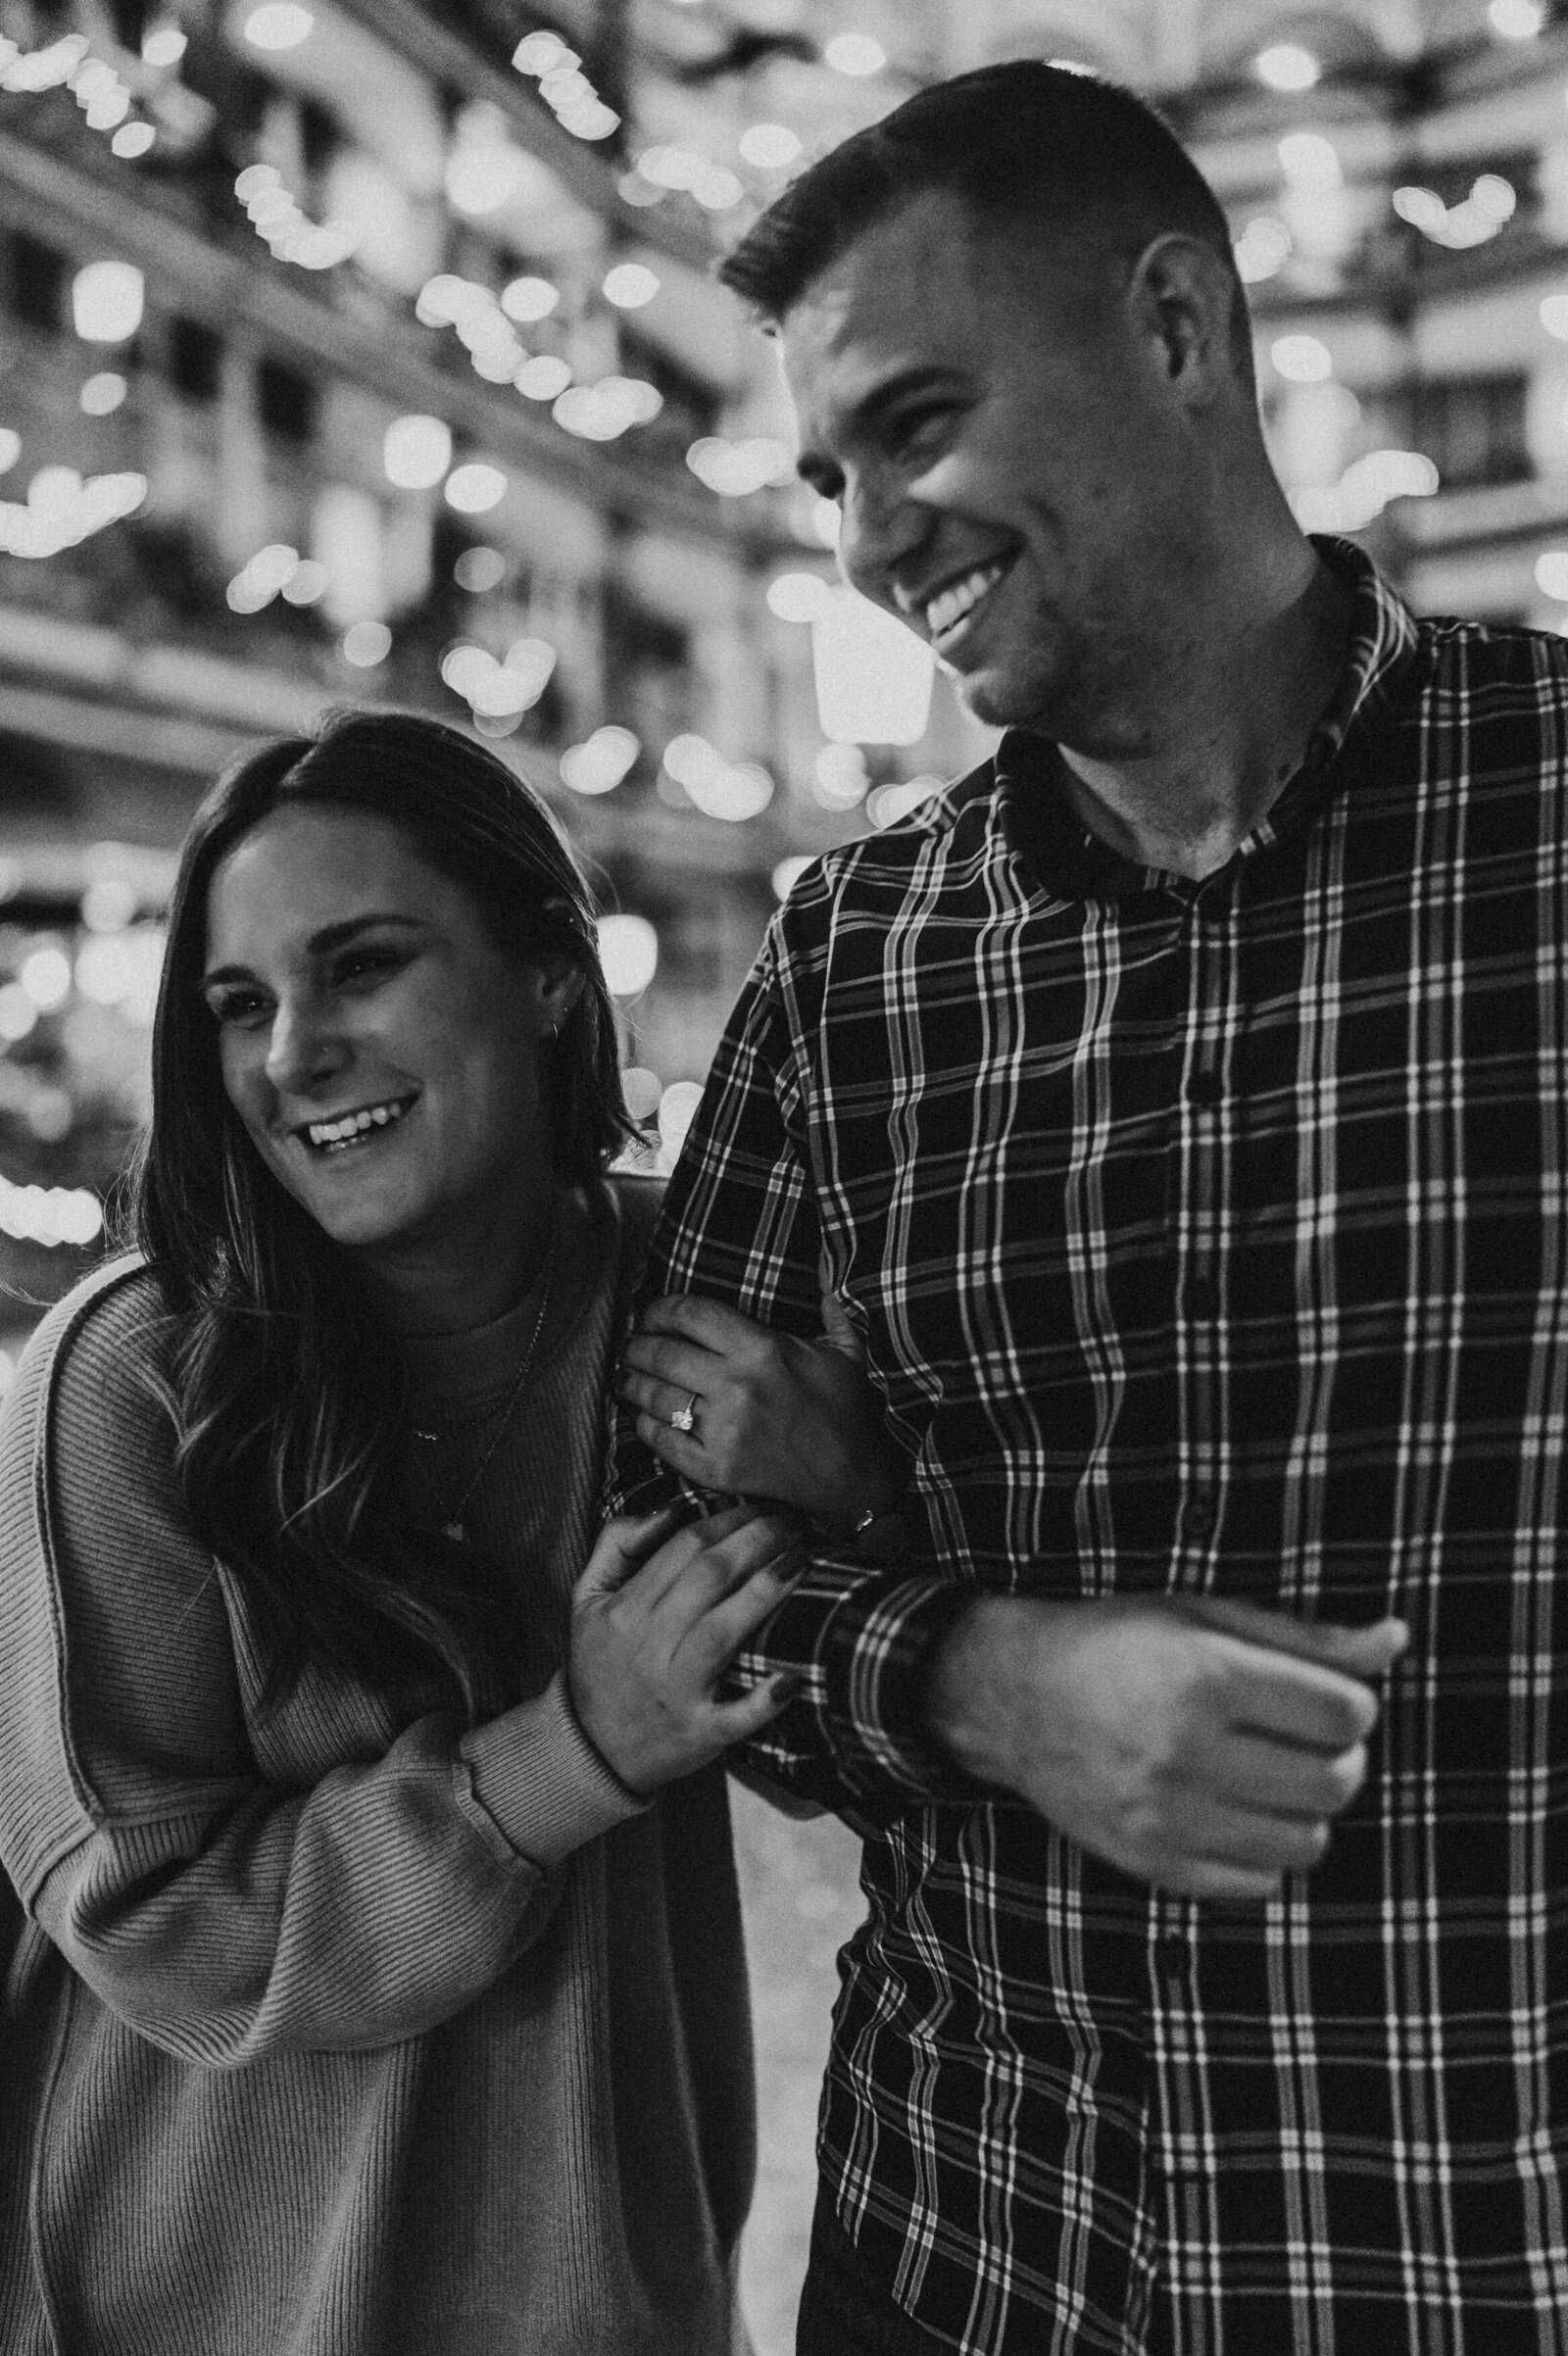 After surprise proposal, couple laughs in photos